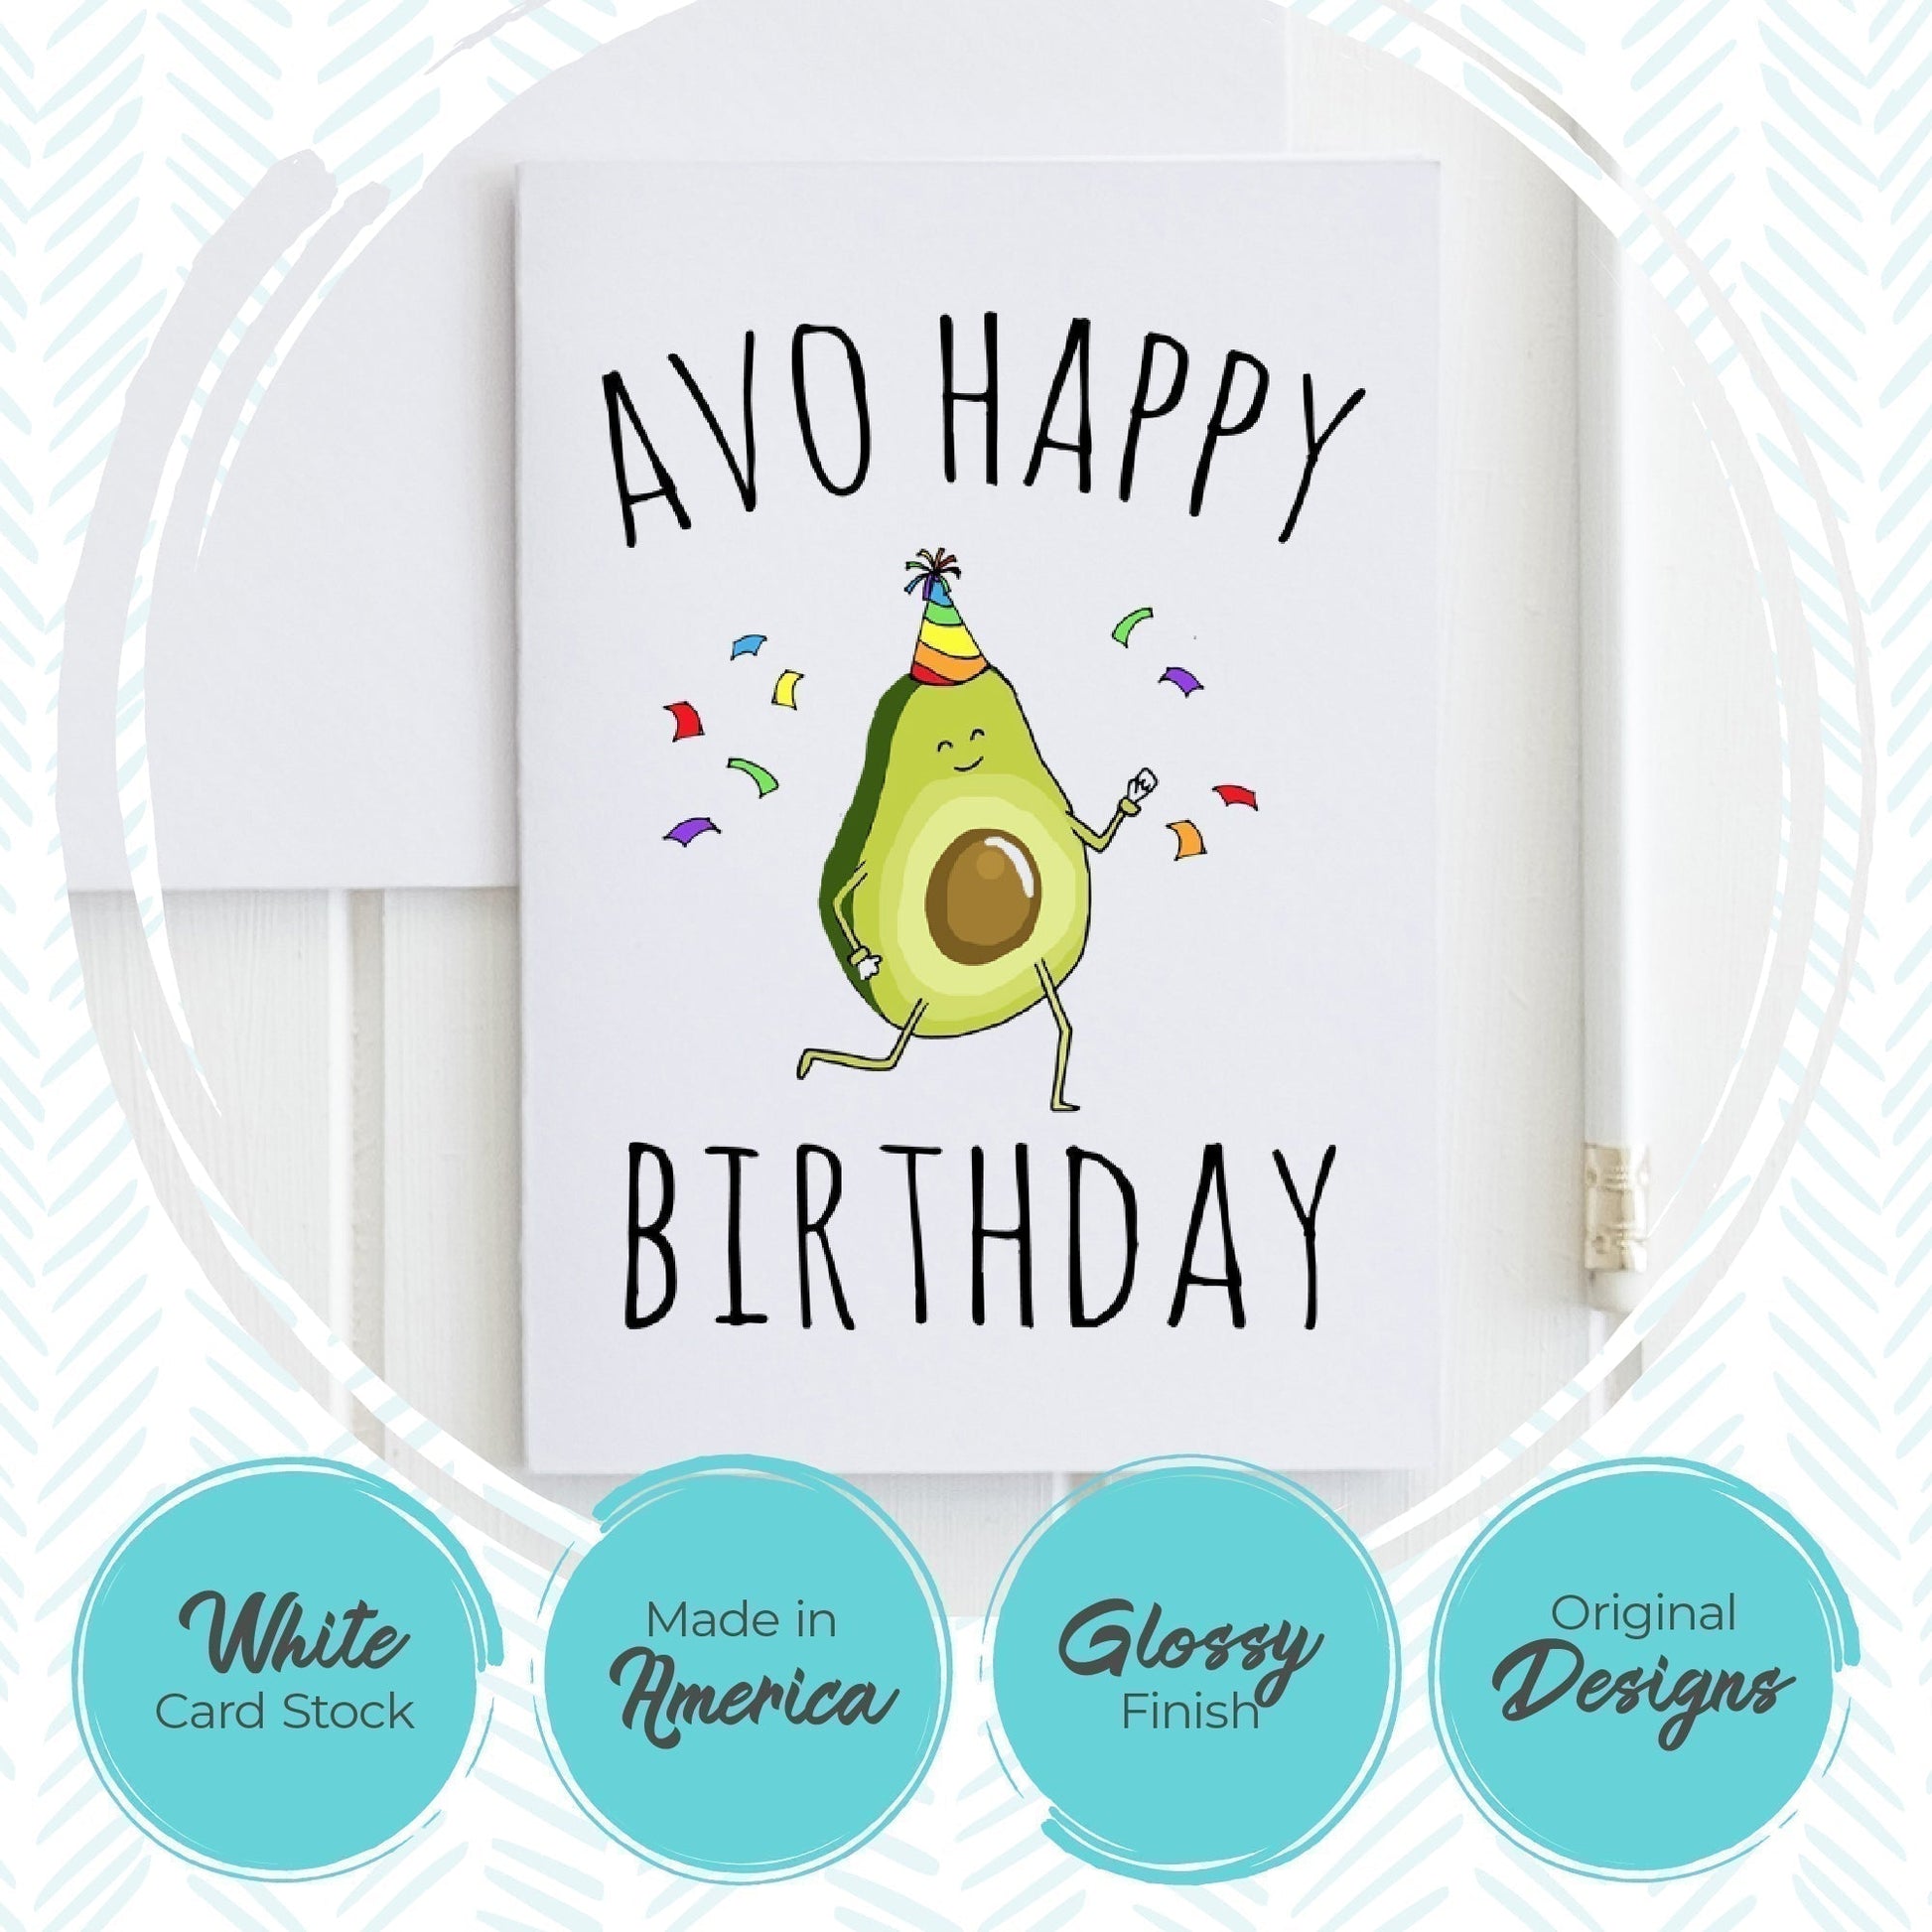 Stop Trying To Make Everyone Happy, You're Not Tequila - Greeting Card - MoonlightMakers